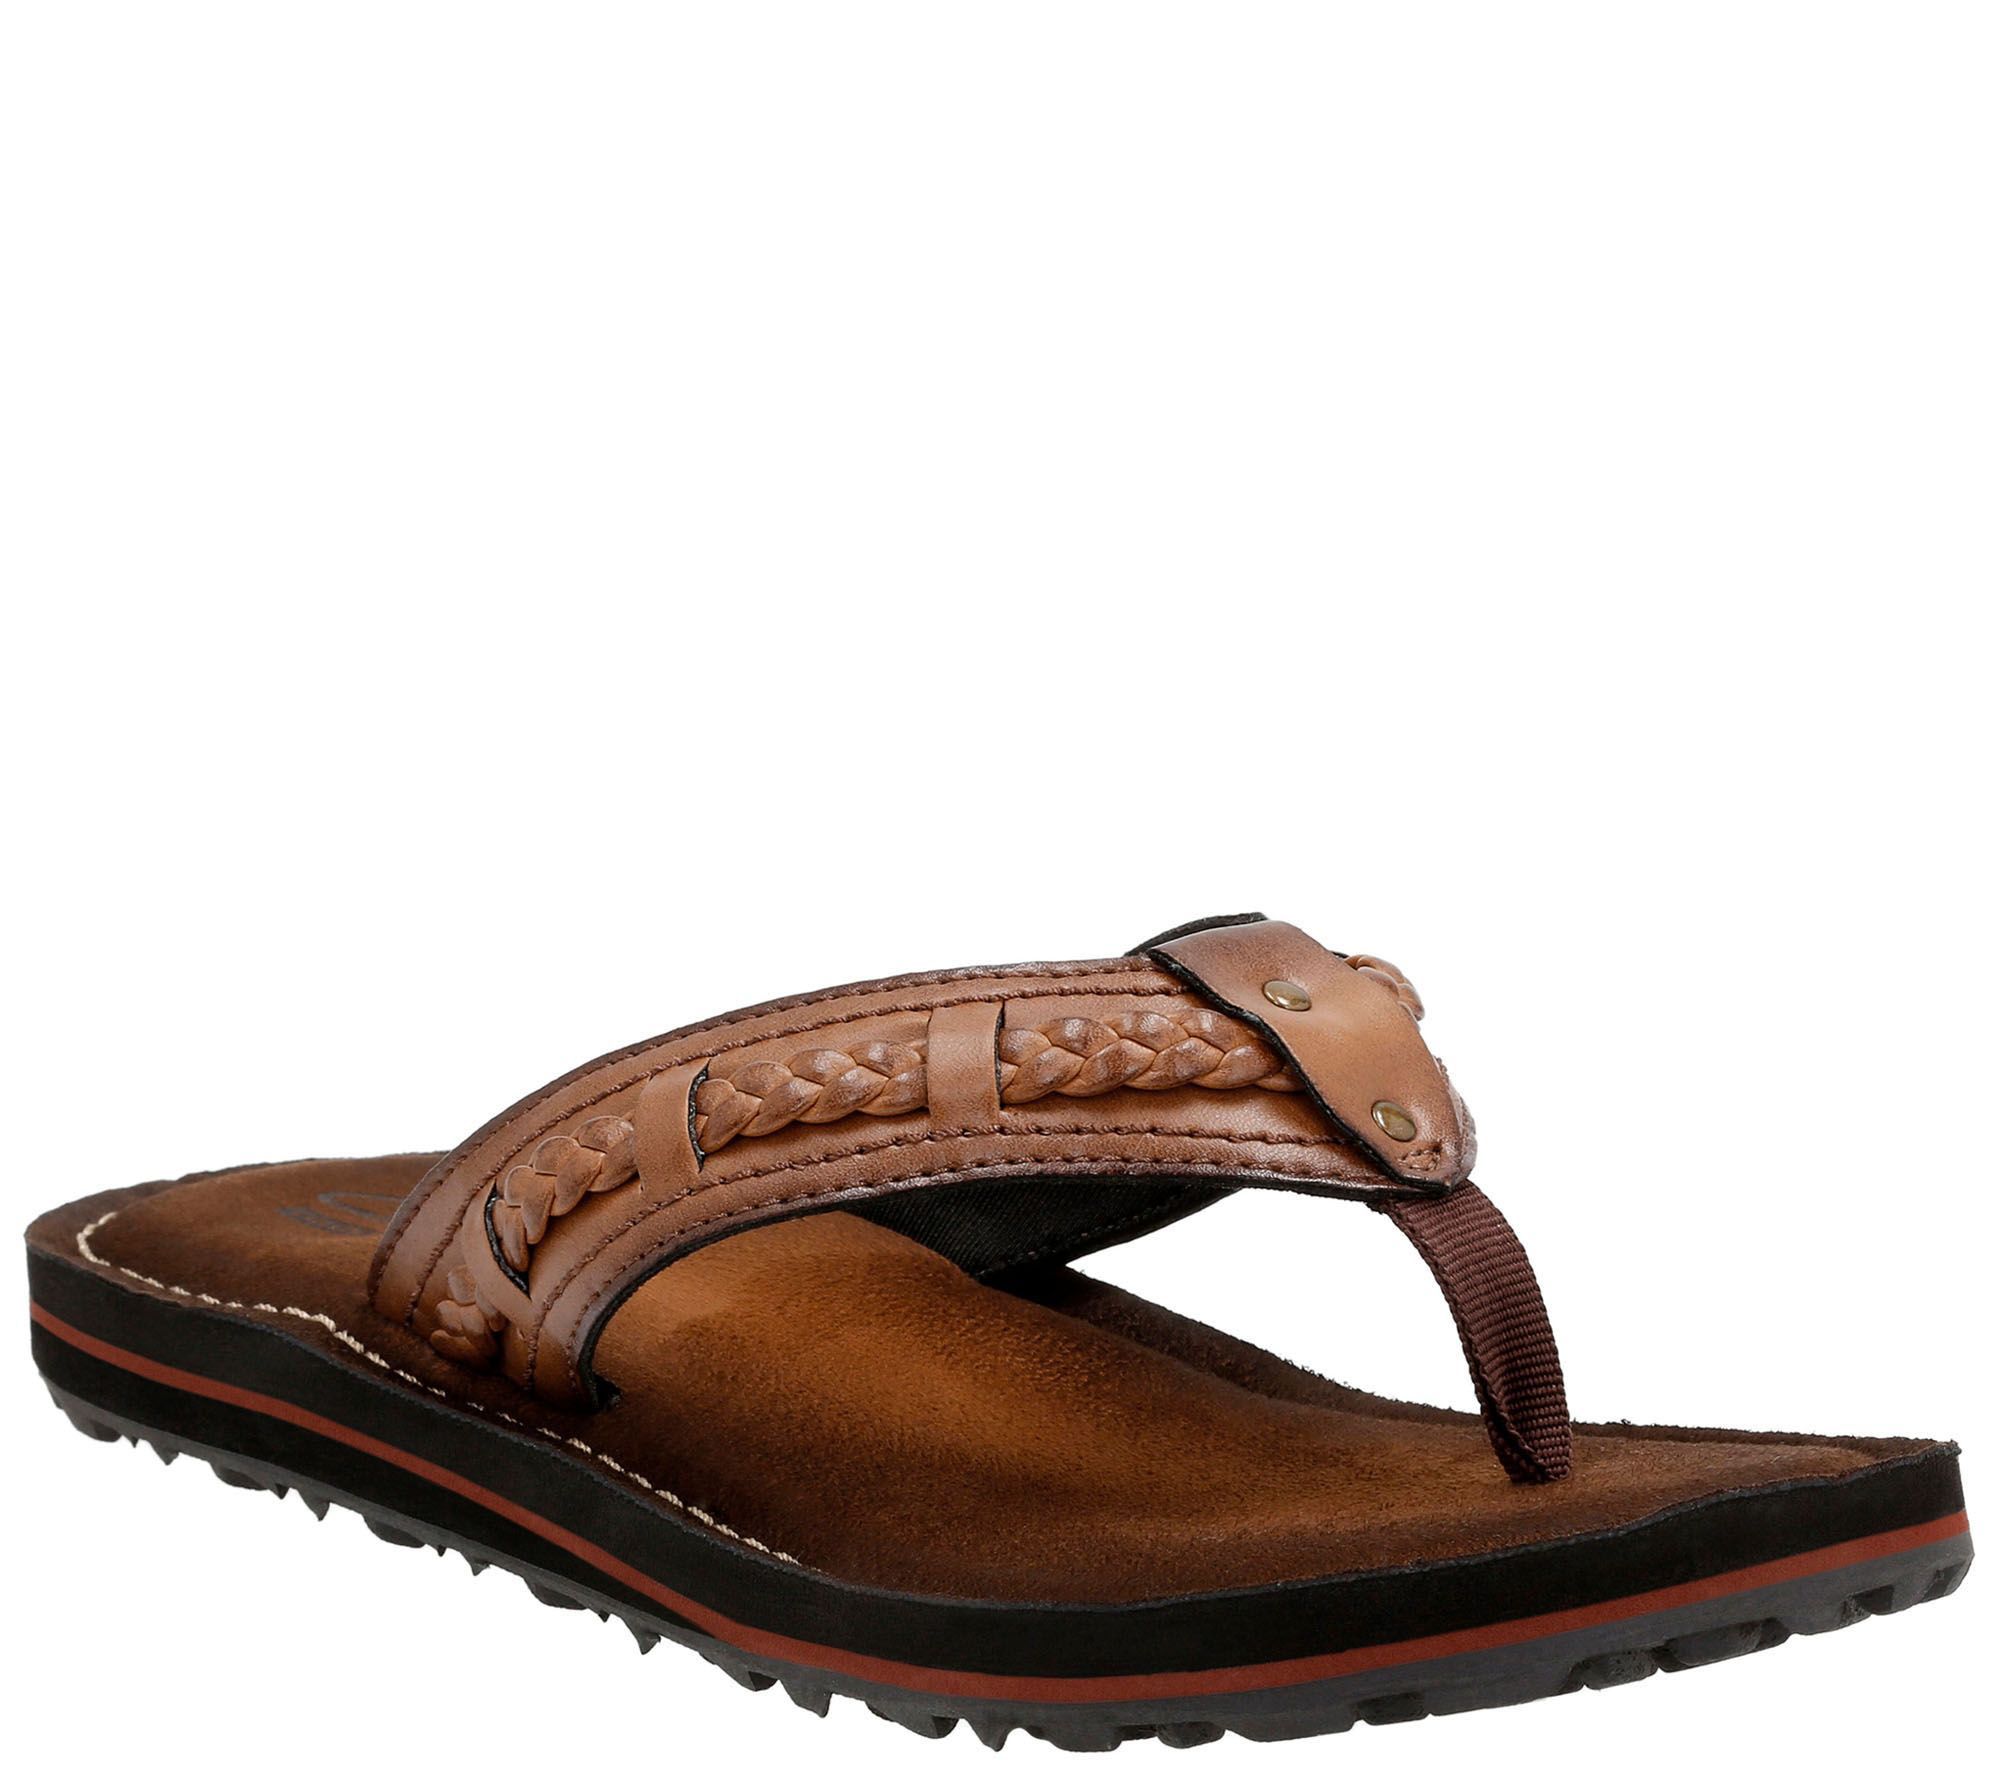 Clarks Collection Flip Flops with 